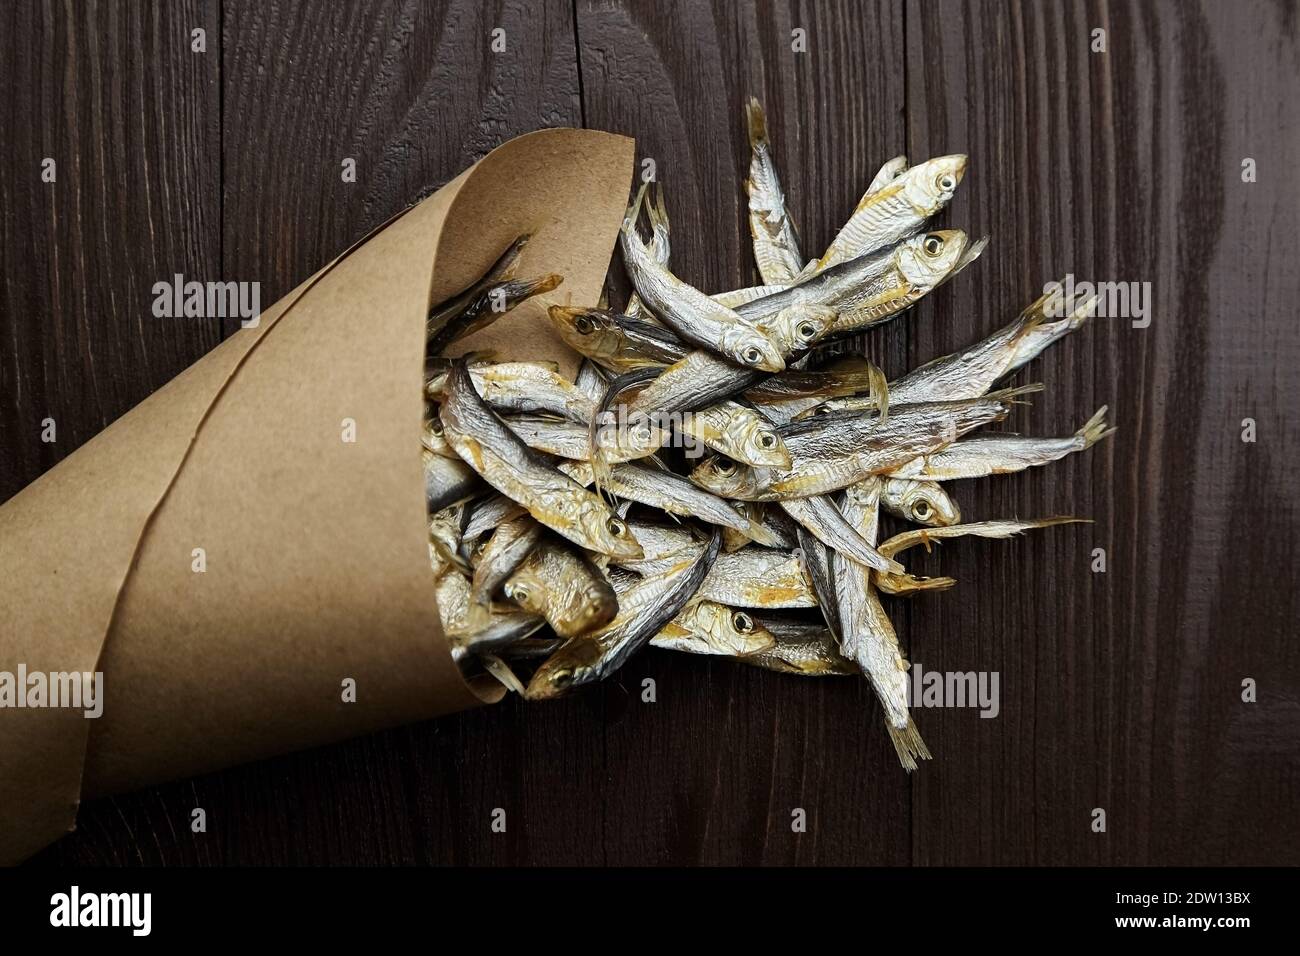 Sun-dried salty small fish. Stockfish in paper bag on dark wooden background. Stock Photo